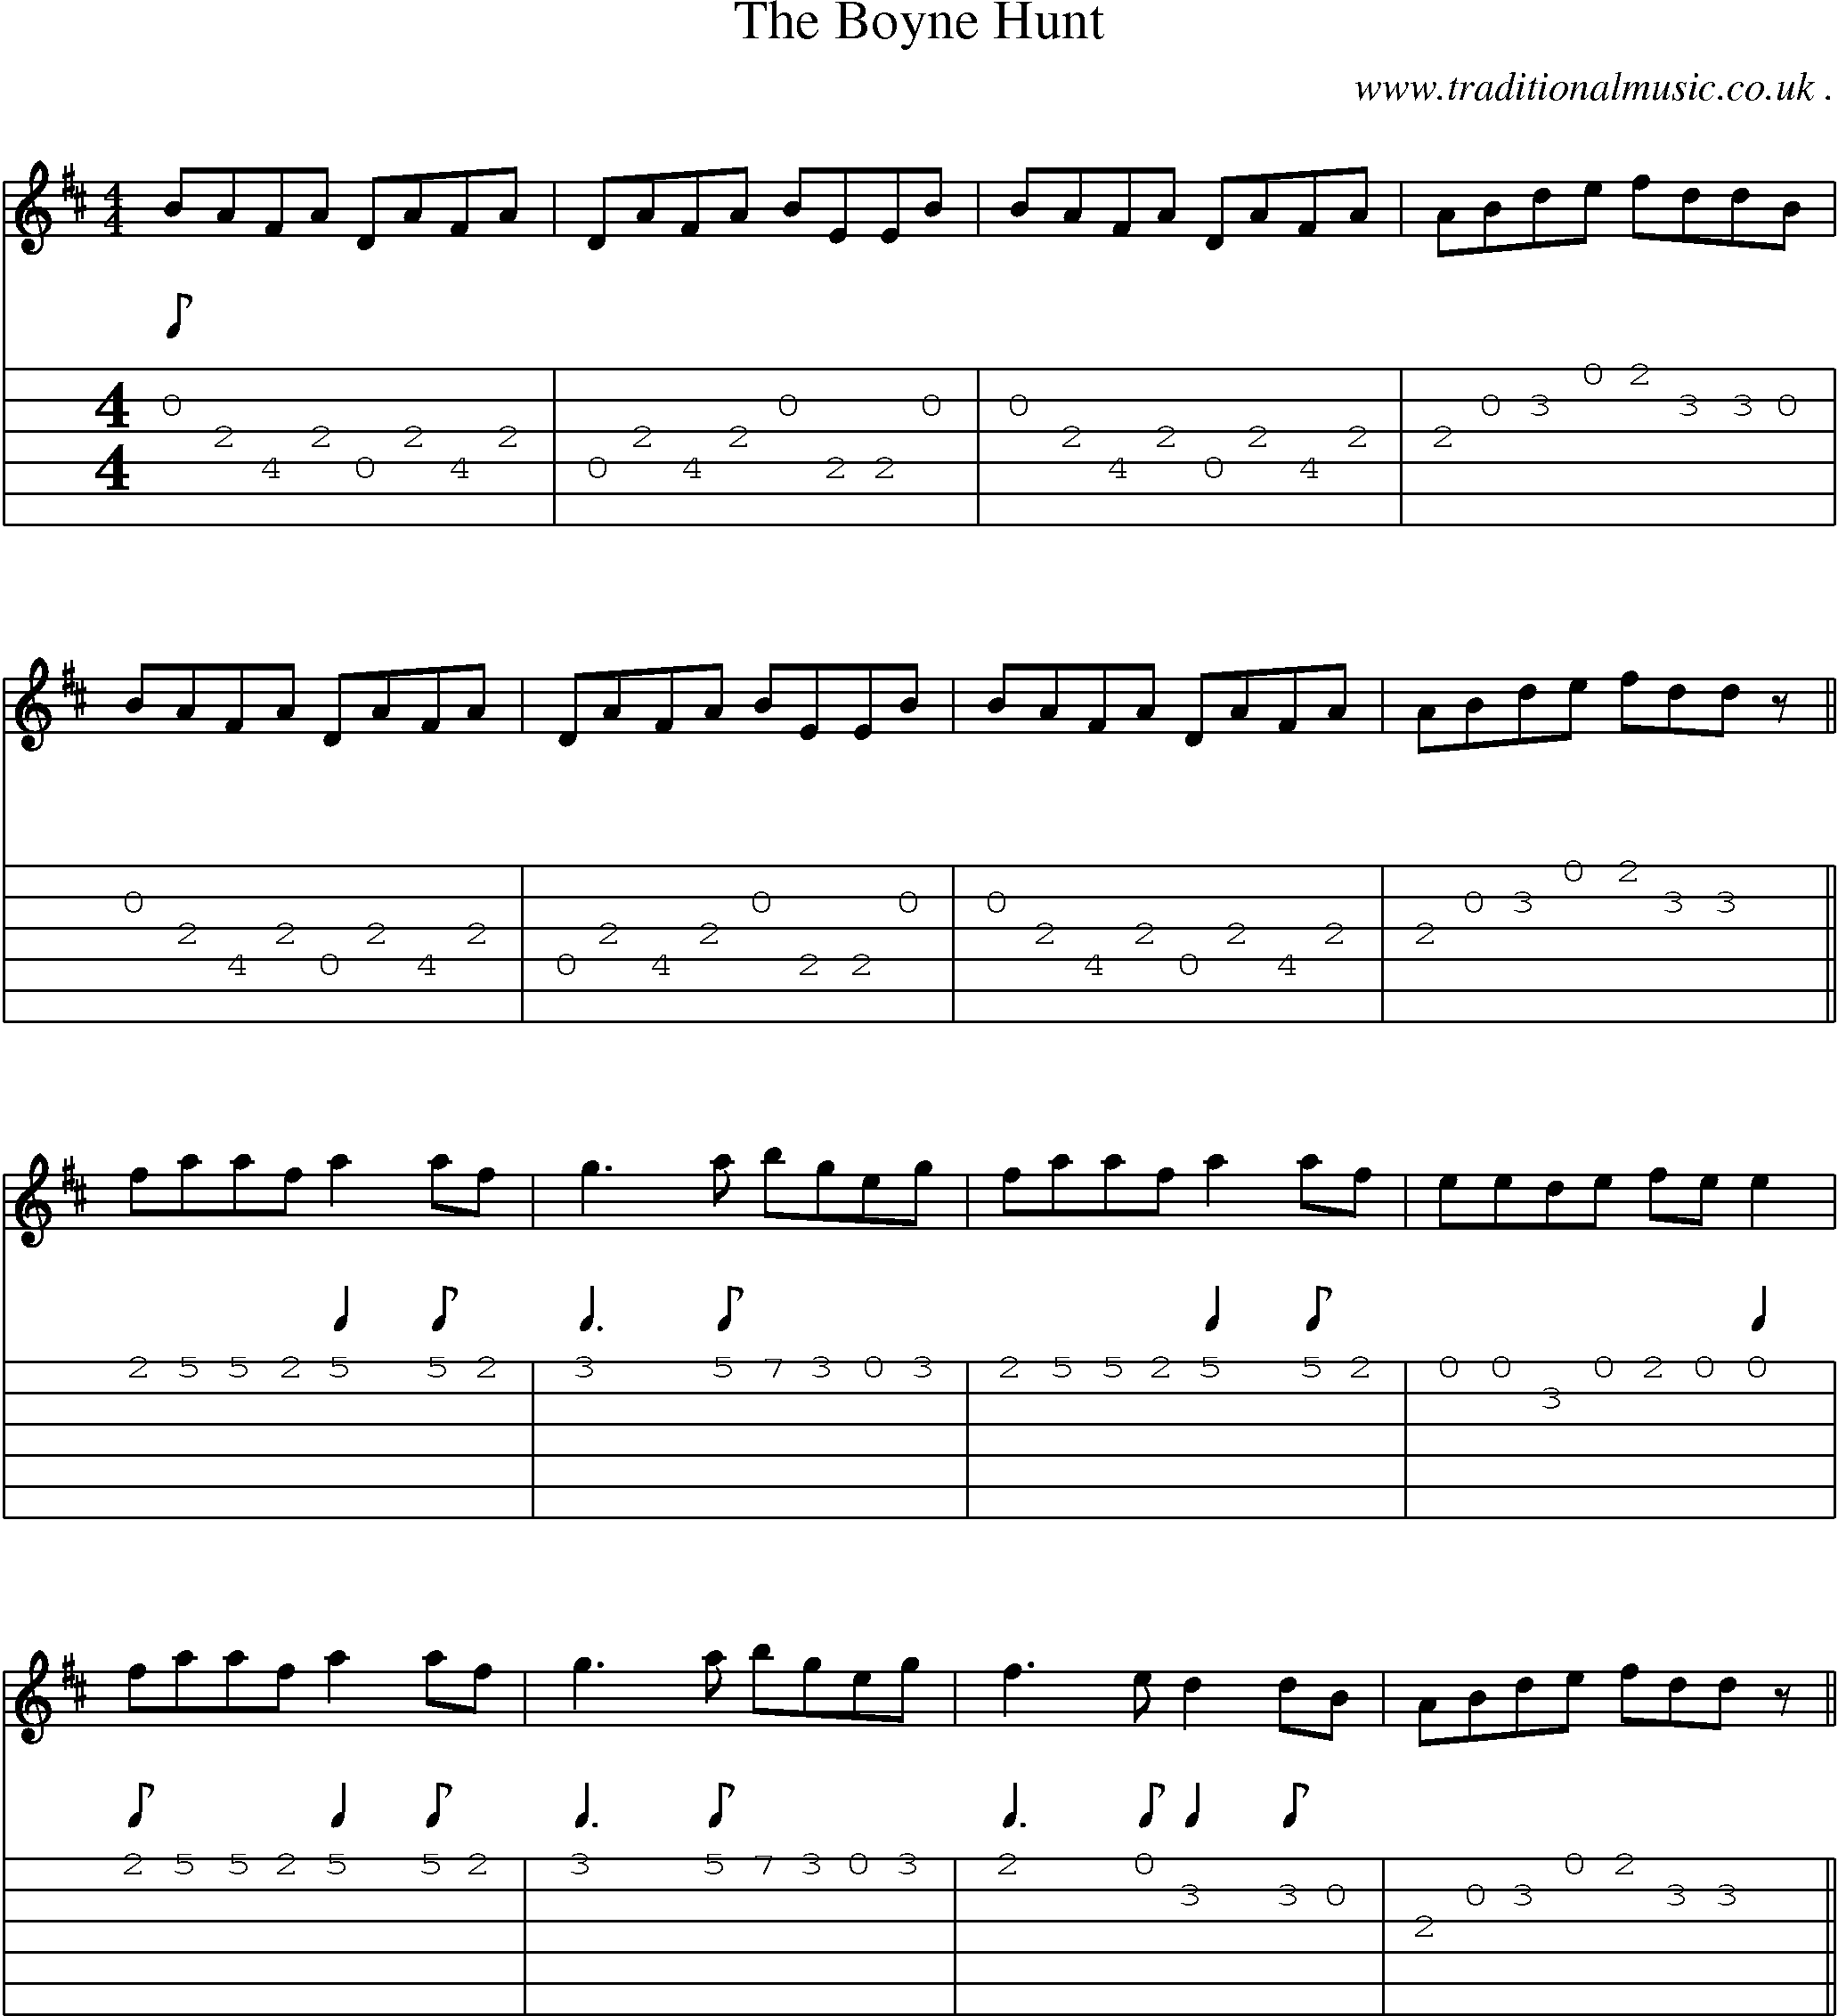 Sheet-Music and Guitar Tabs for The Boyne Hunt